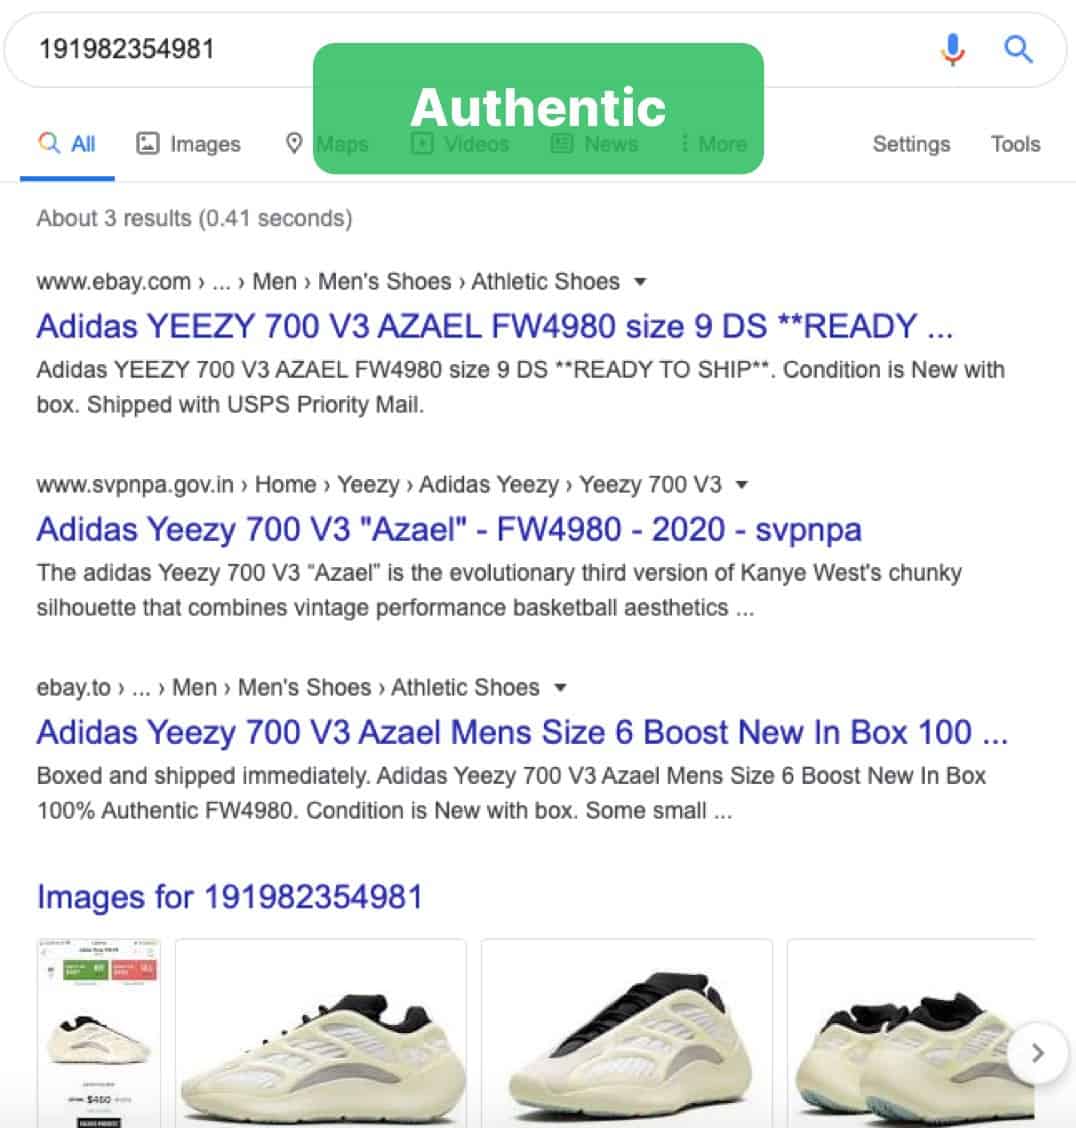 yeezy 700 v3 authentic barcode scan